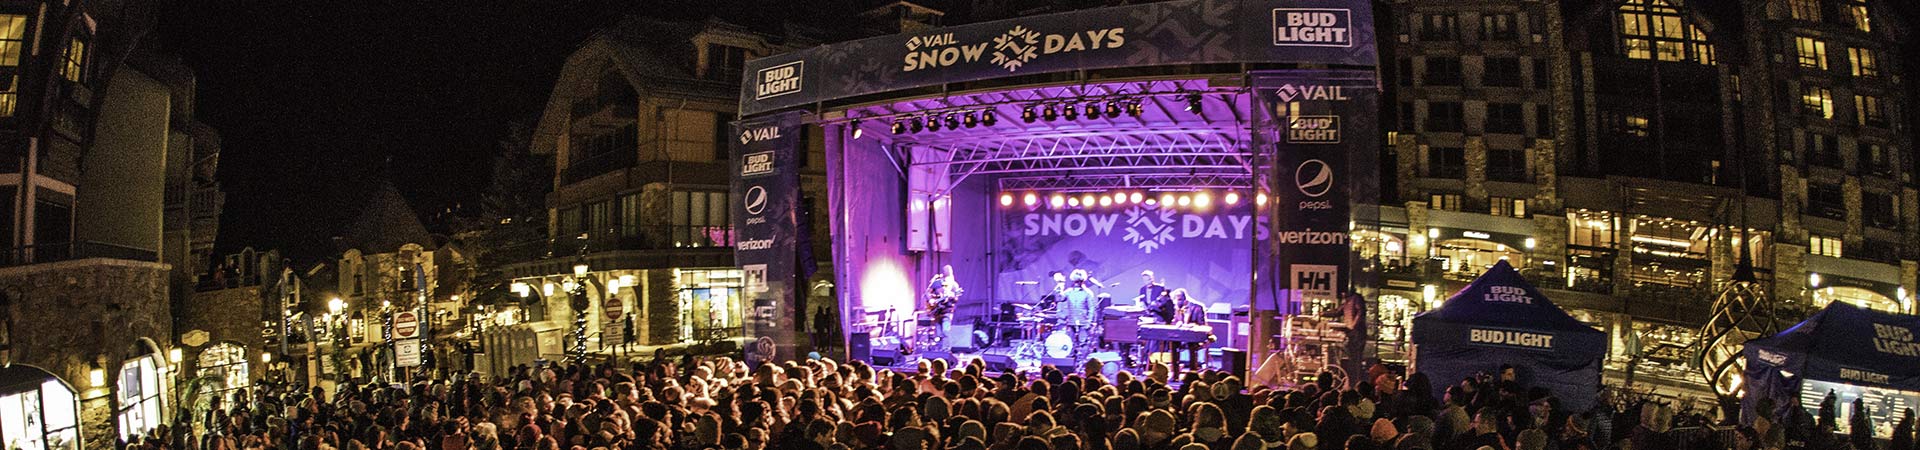 Vail snow days concerts